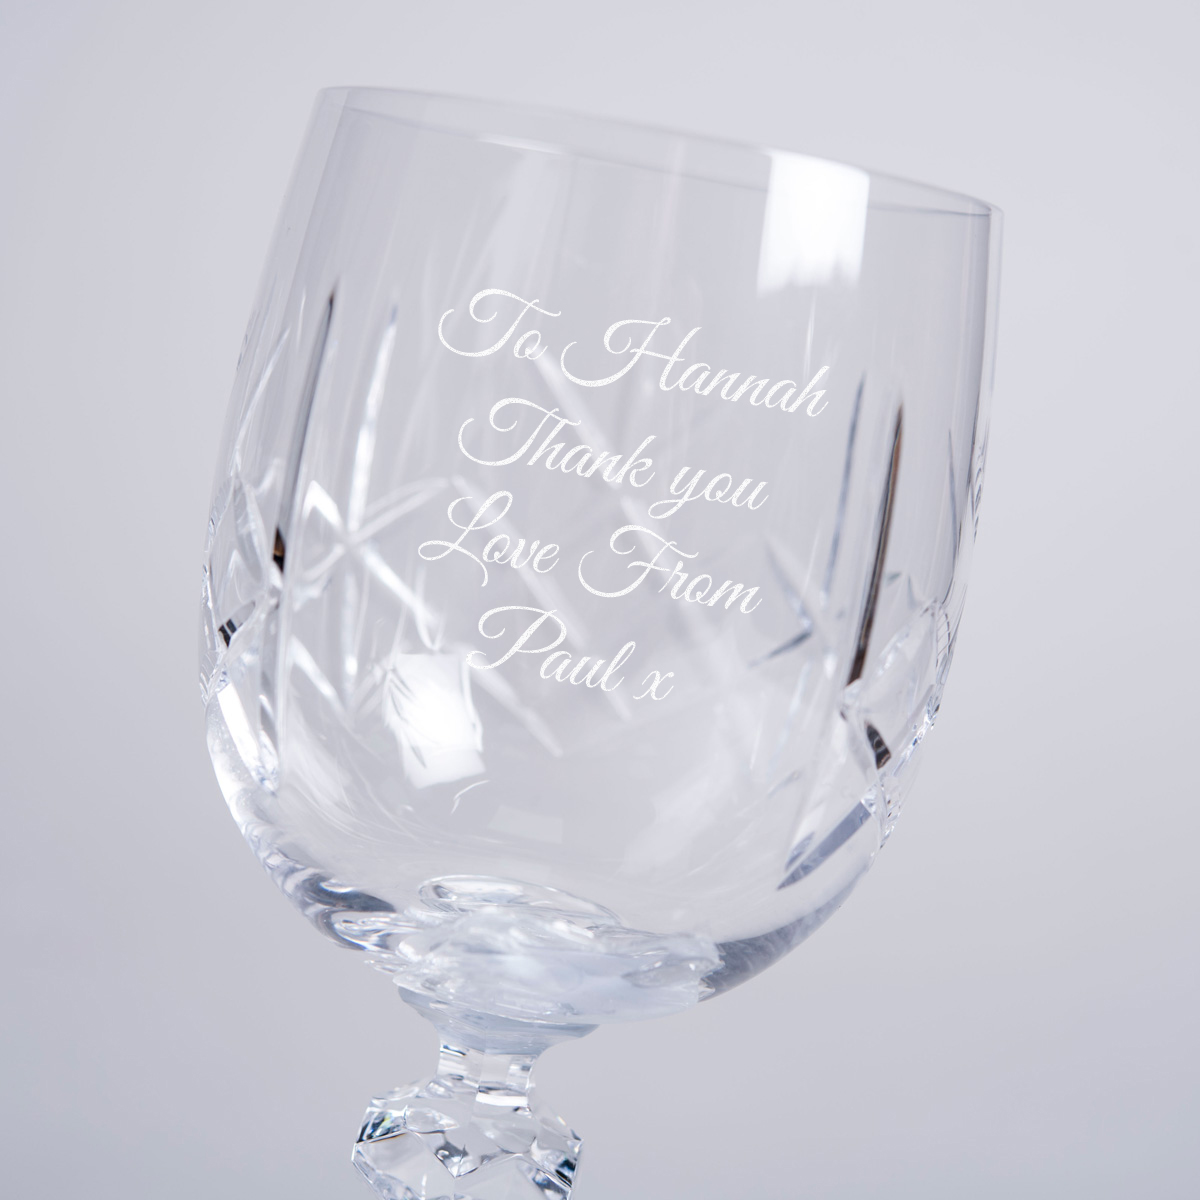 Personalised Cut Crystal Wine Glass - Message